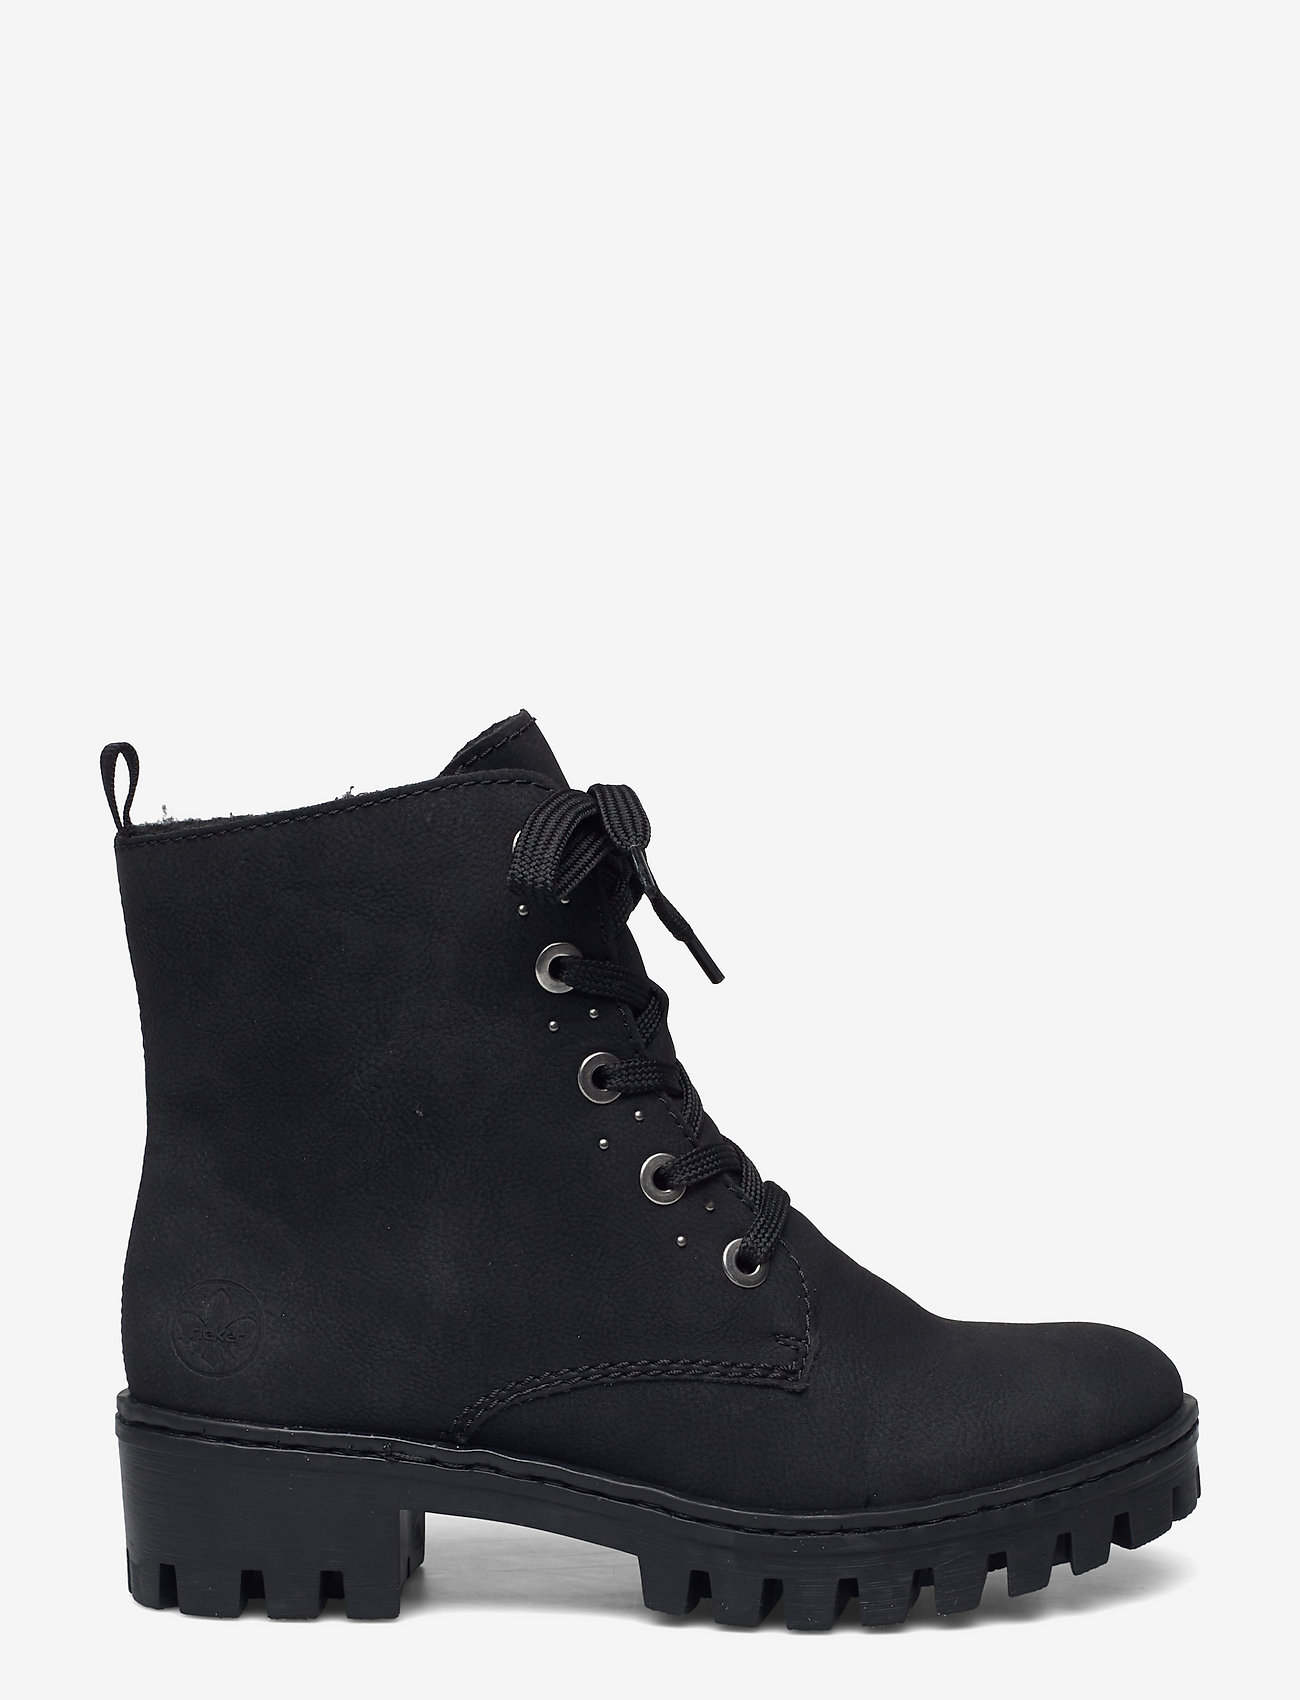 Rieker - 75700-01 - laced boots - black - 1